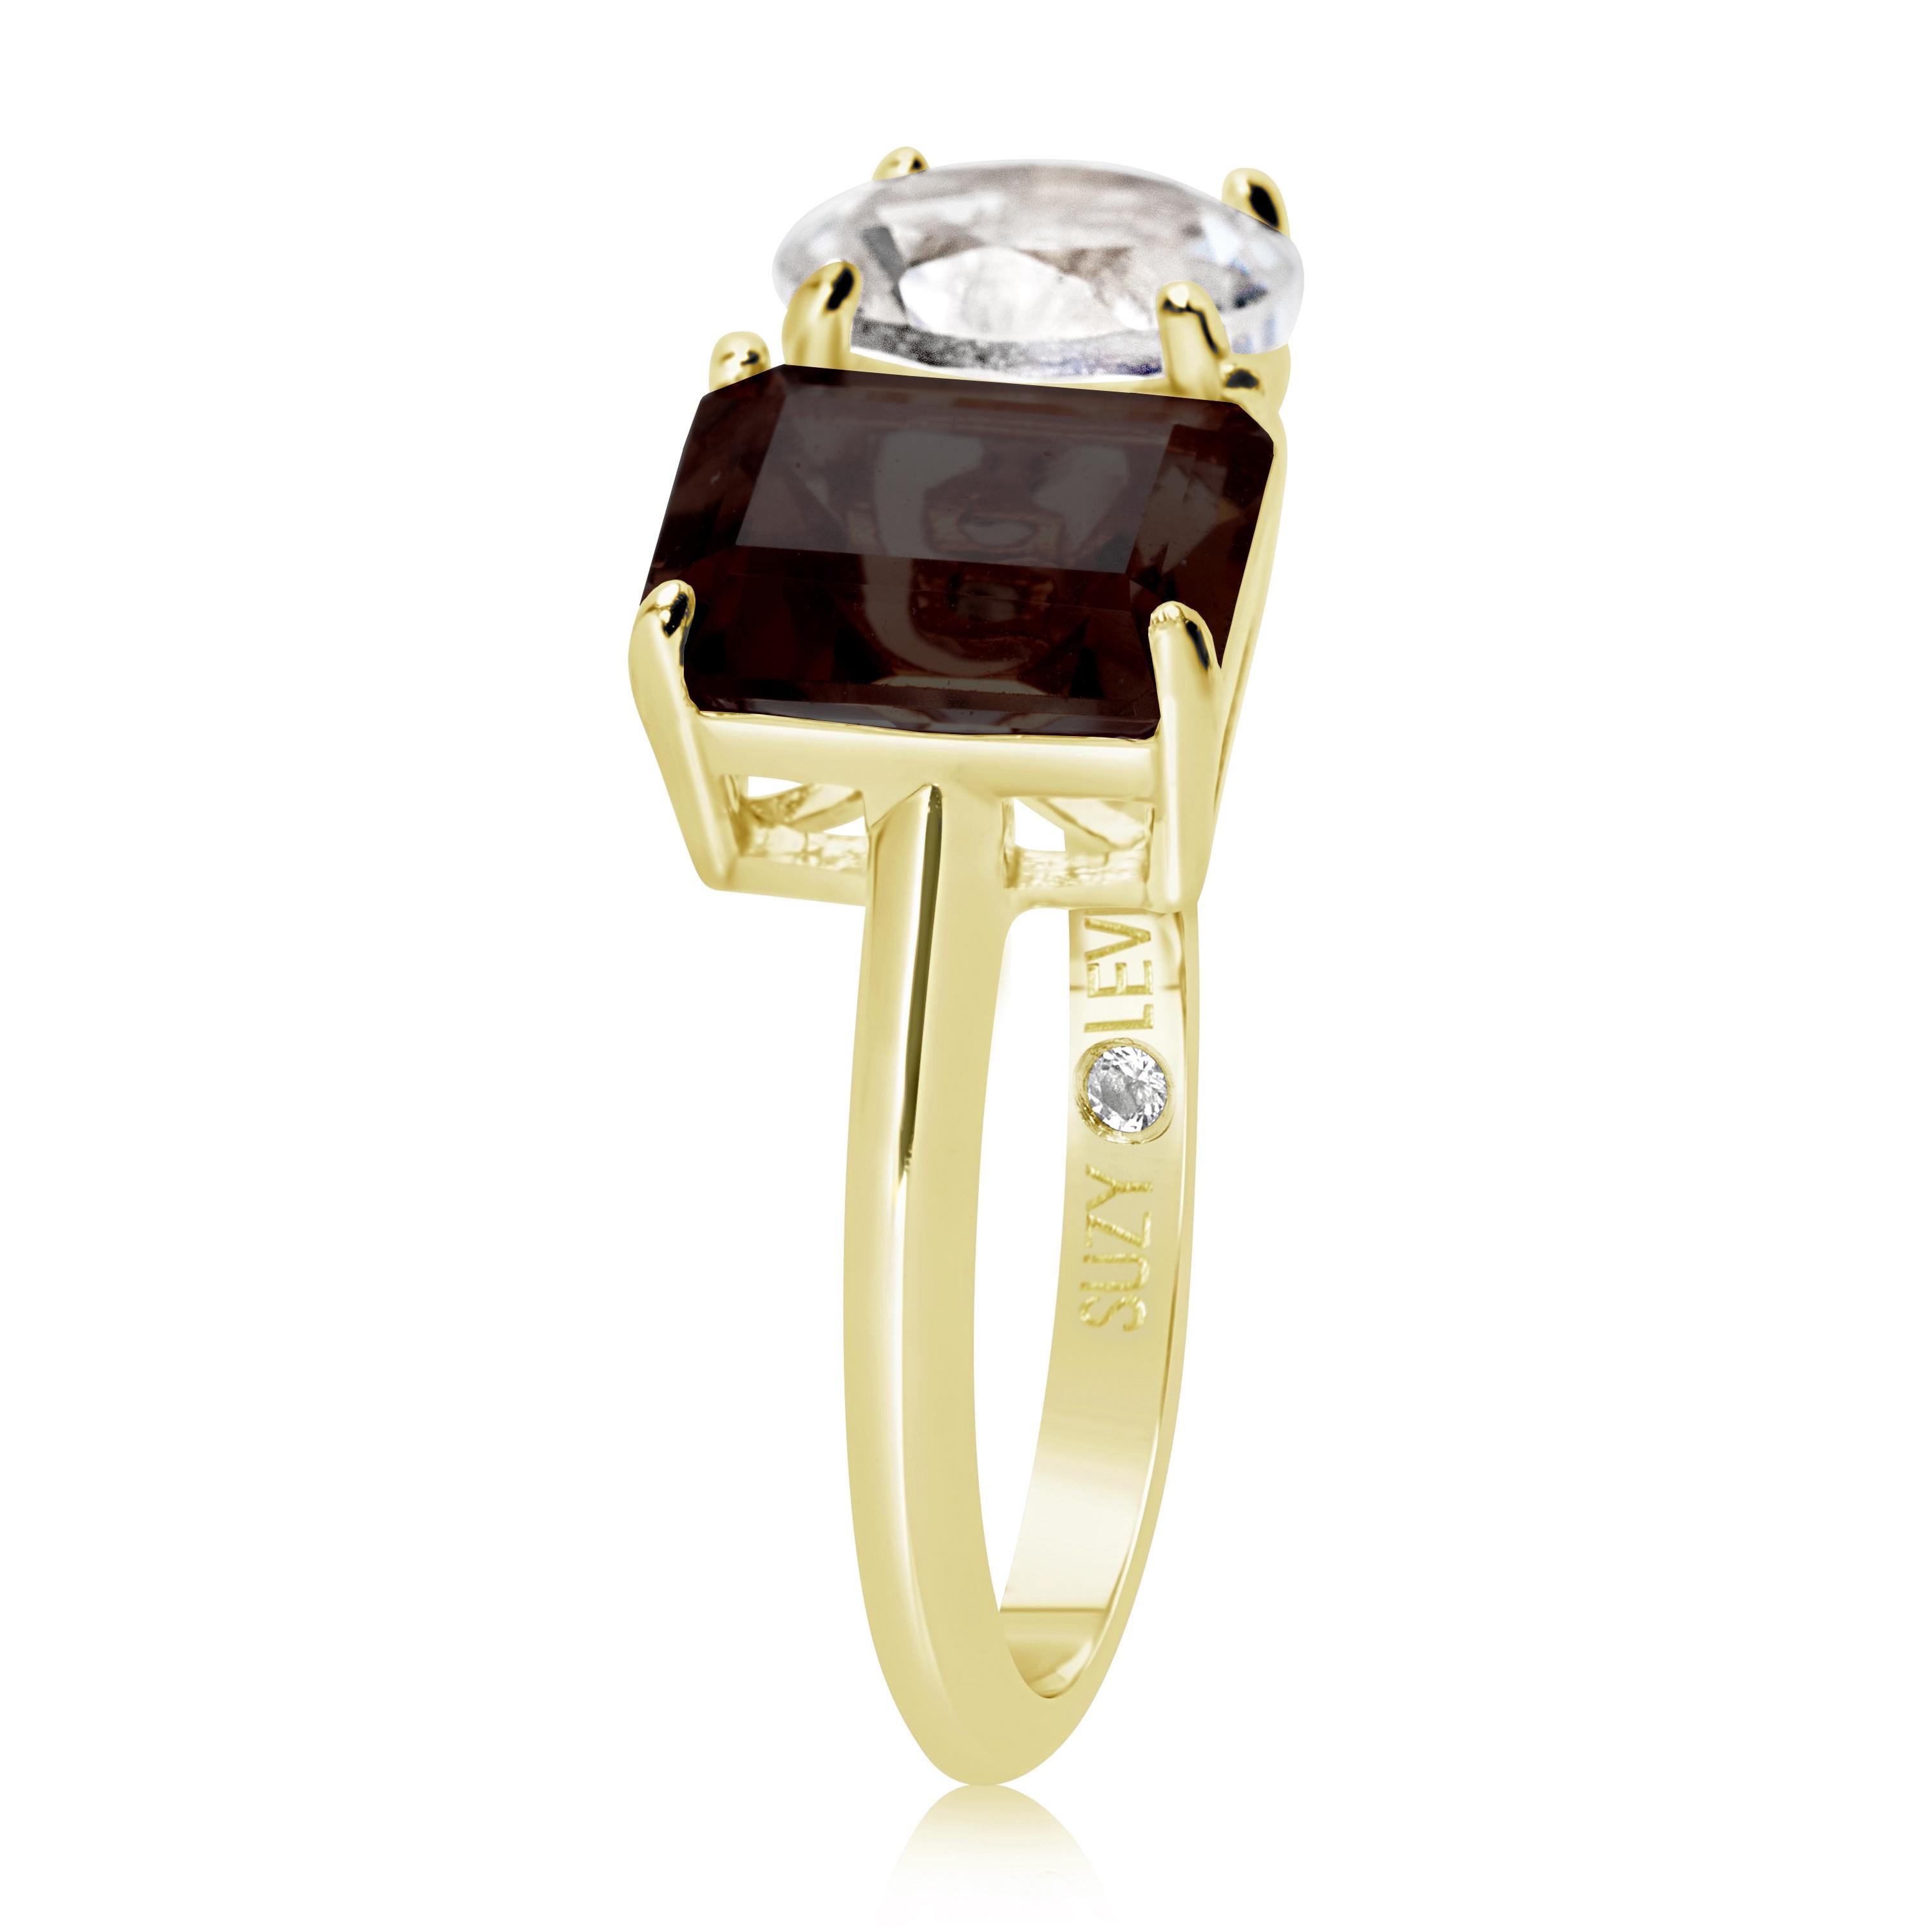 Shimmering in hues of white and brown, this Suzy Levian ring is as on trend as can be, and features a round cut white topaz and an emerald cut brown smoky quartz as a perfectly matched pair. This ring symbolizes a perfect pairing of unique shapes.